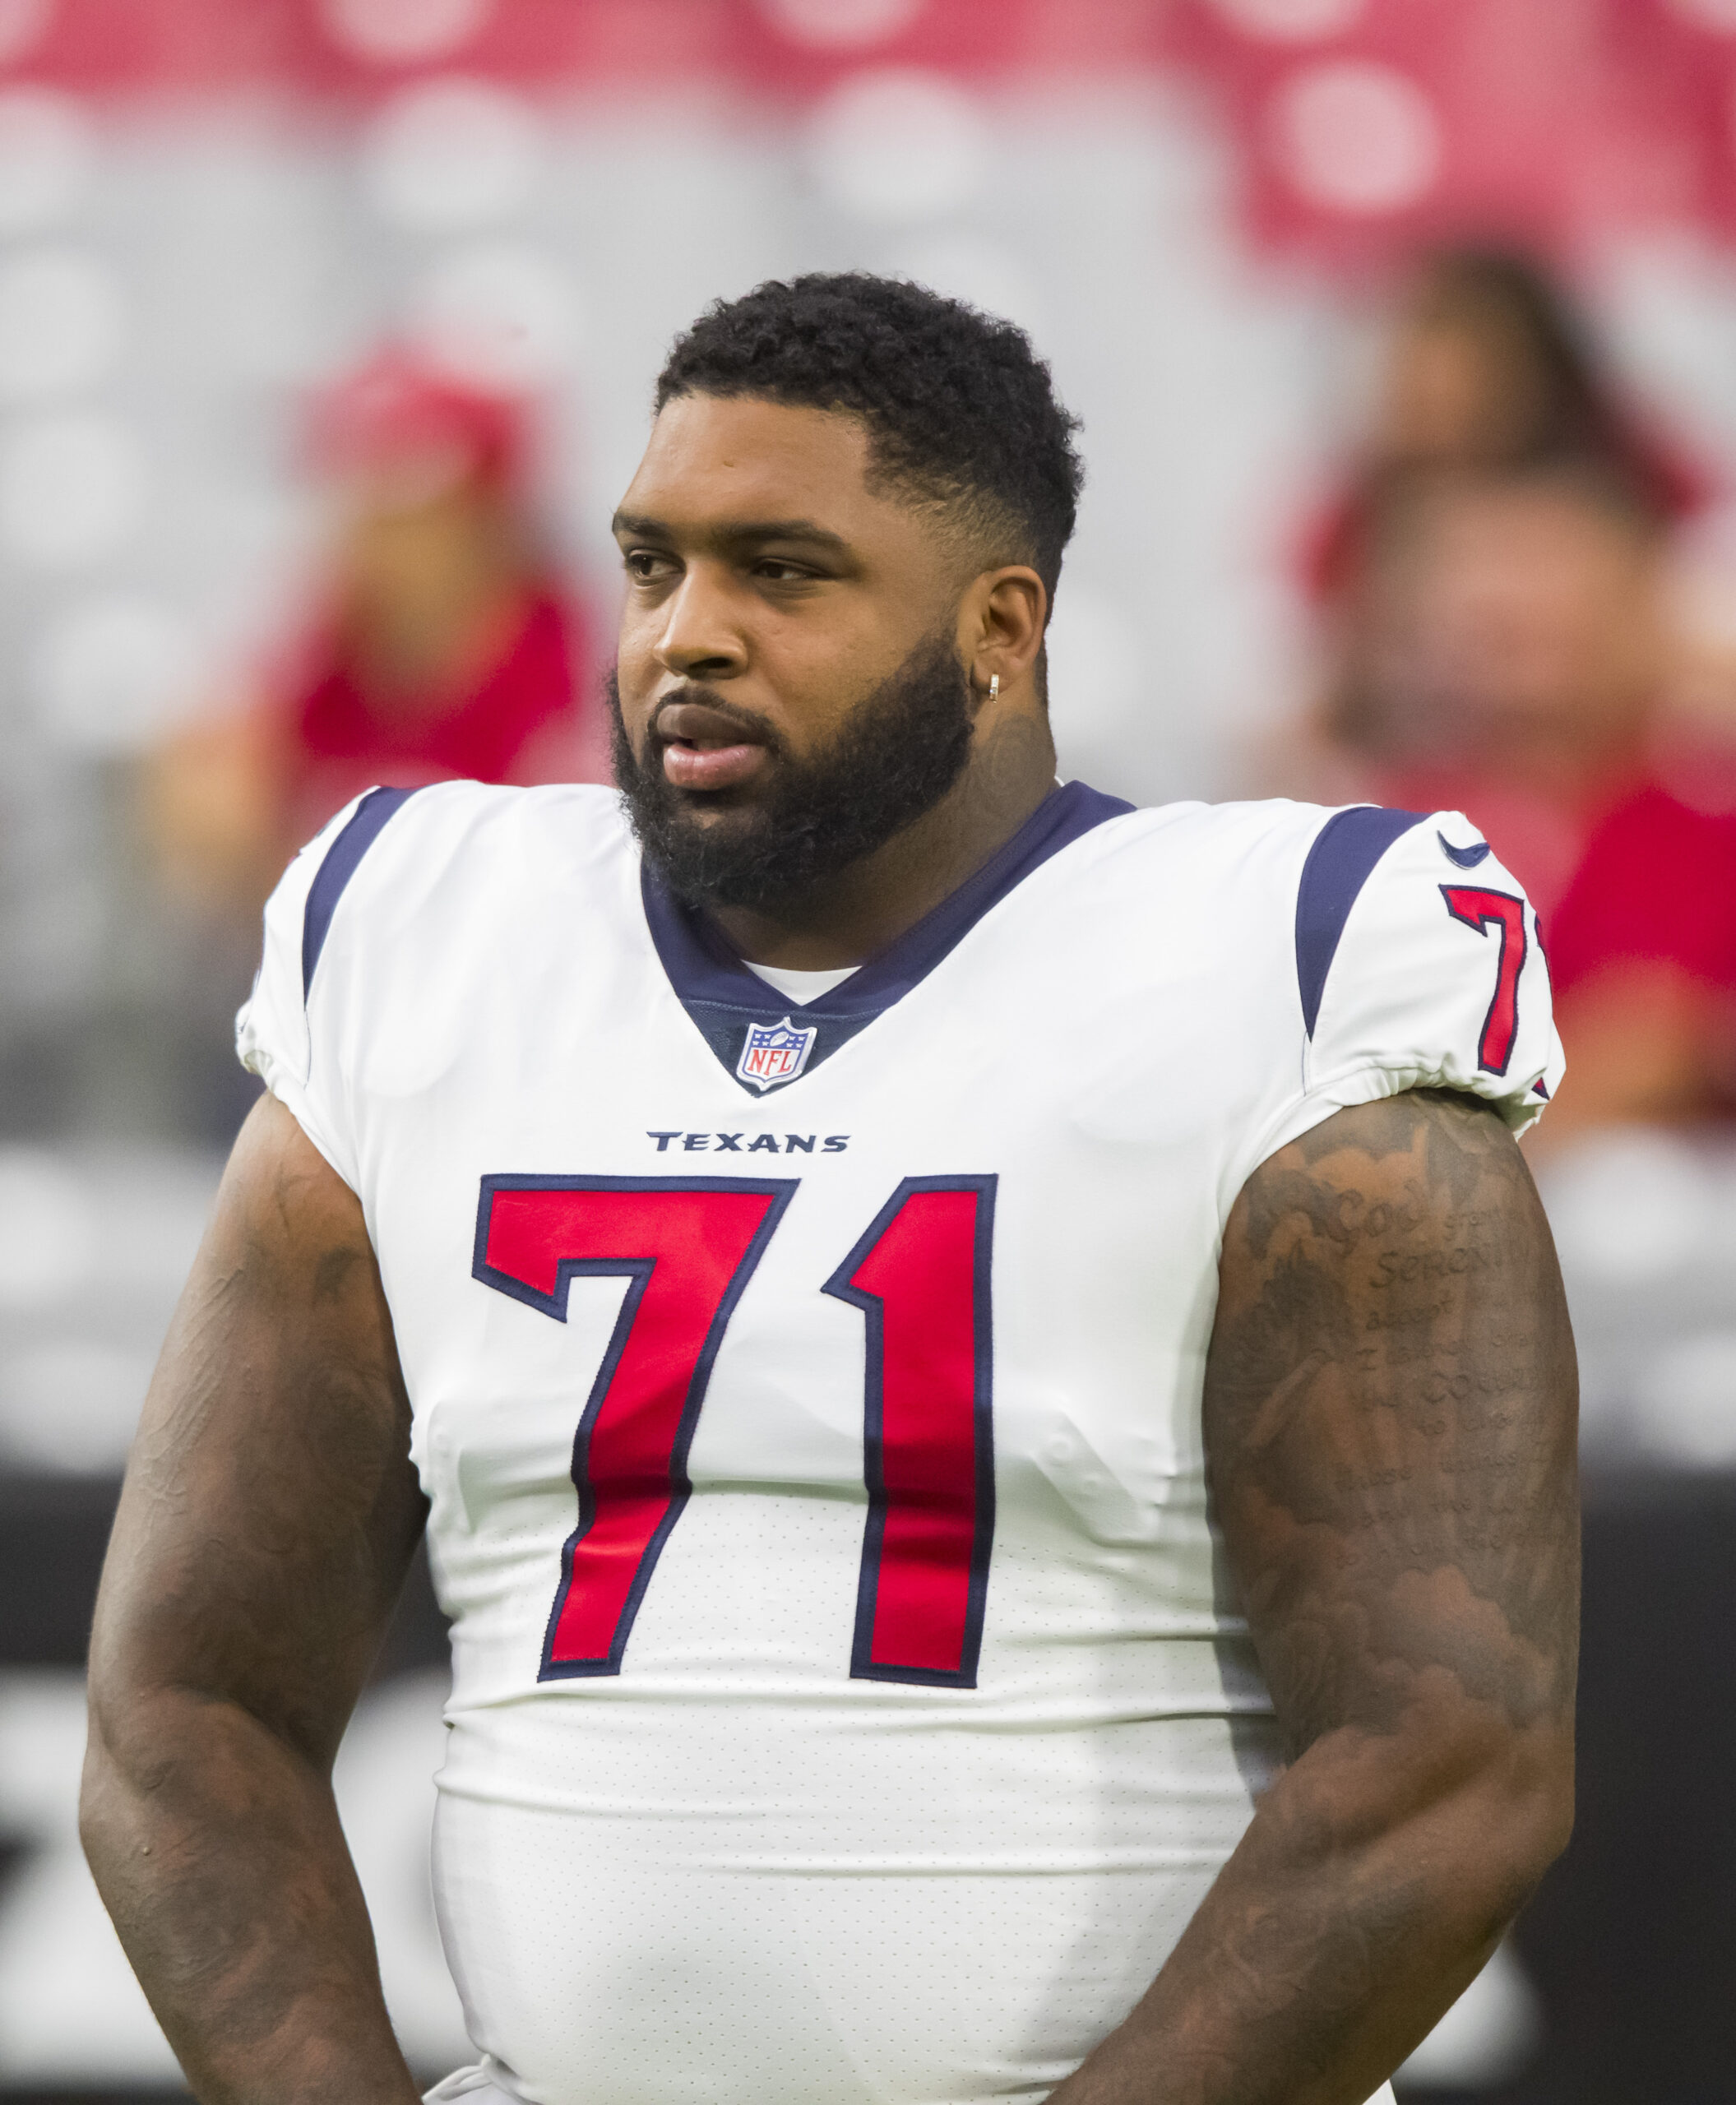 Latest On Texans' Offensive Line Injuries